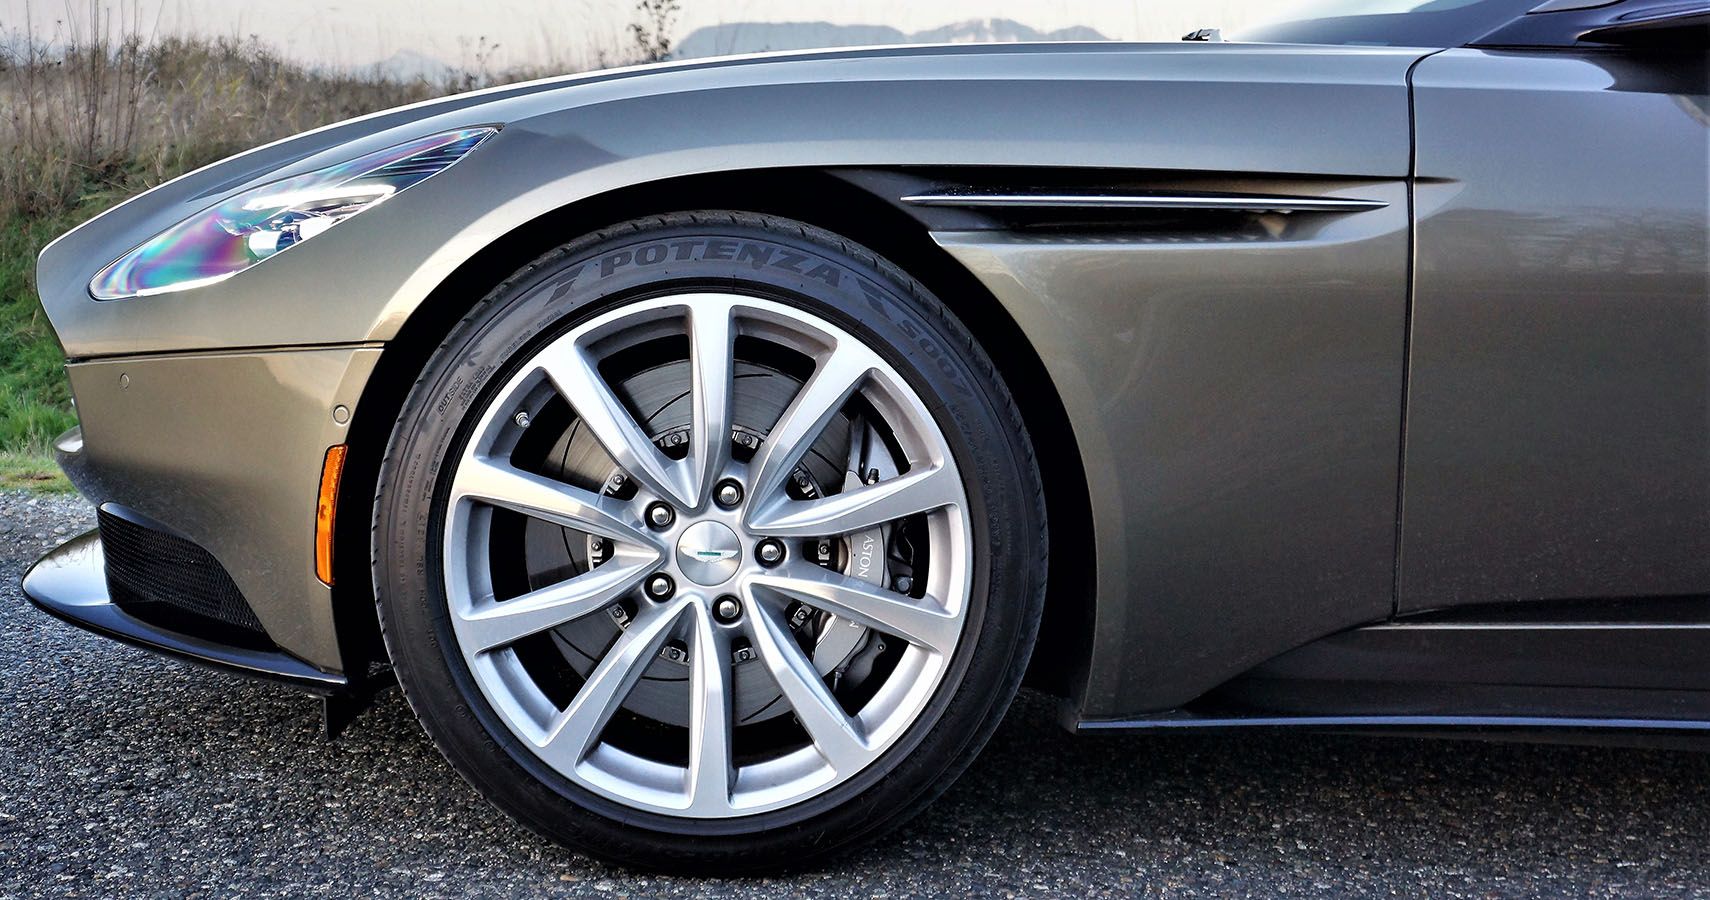 The way the front fenders float over the wheels below is a superb design element.